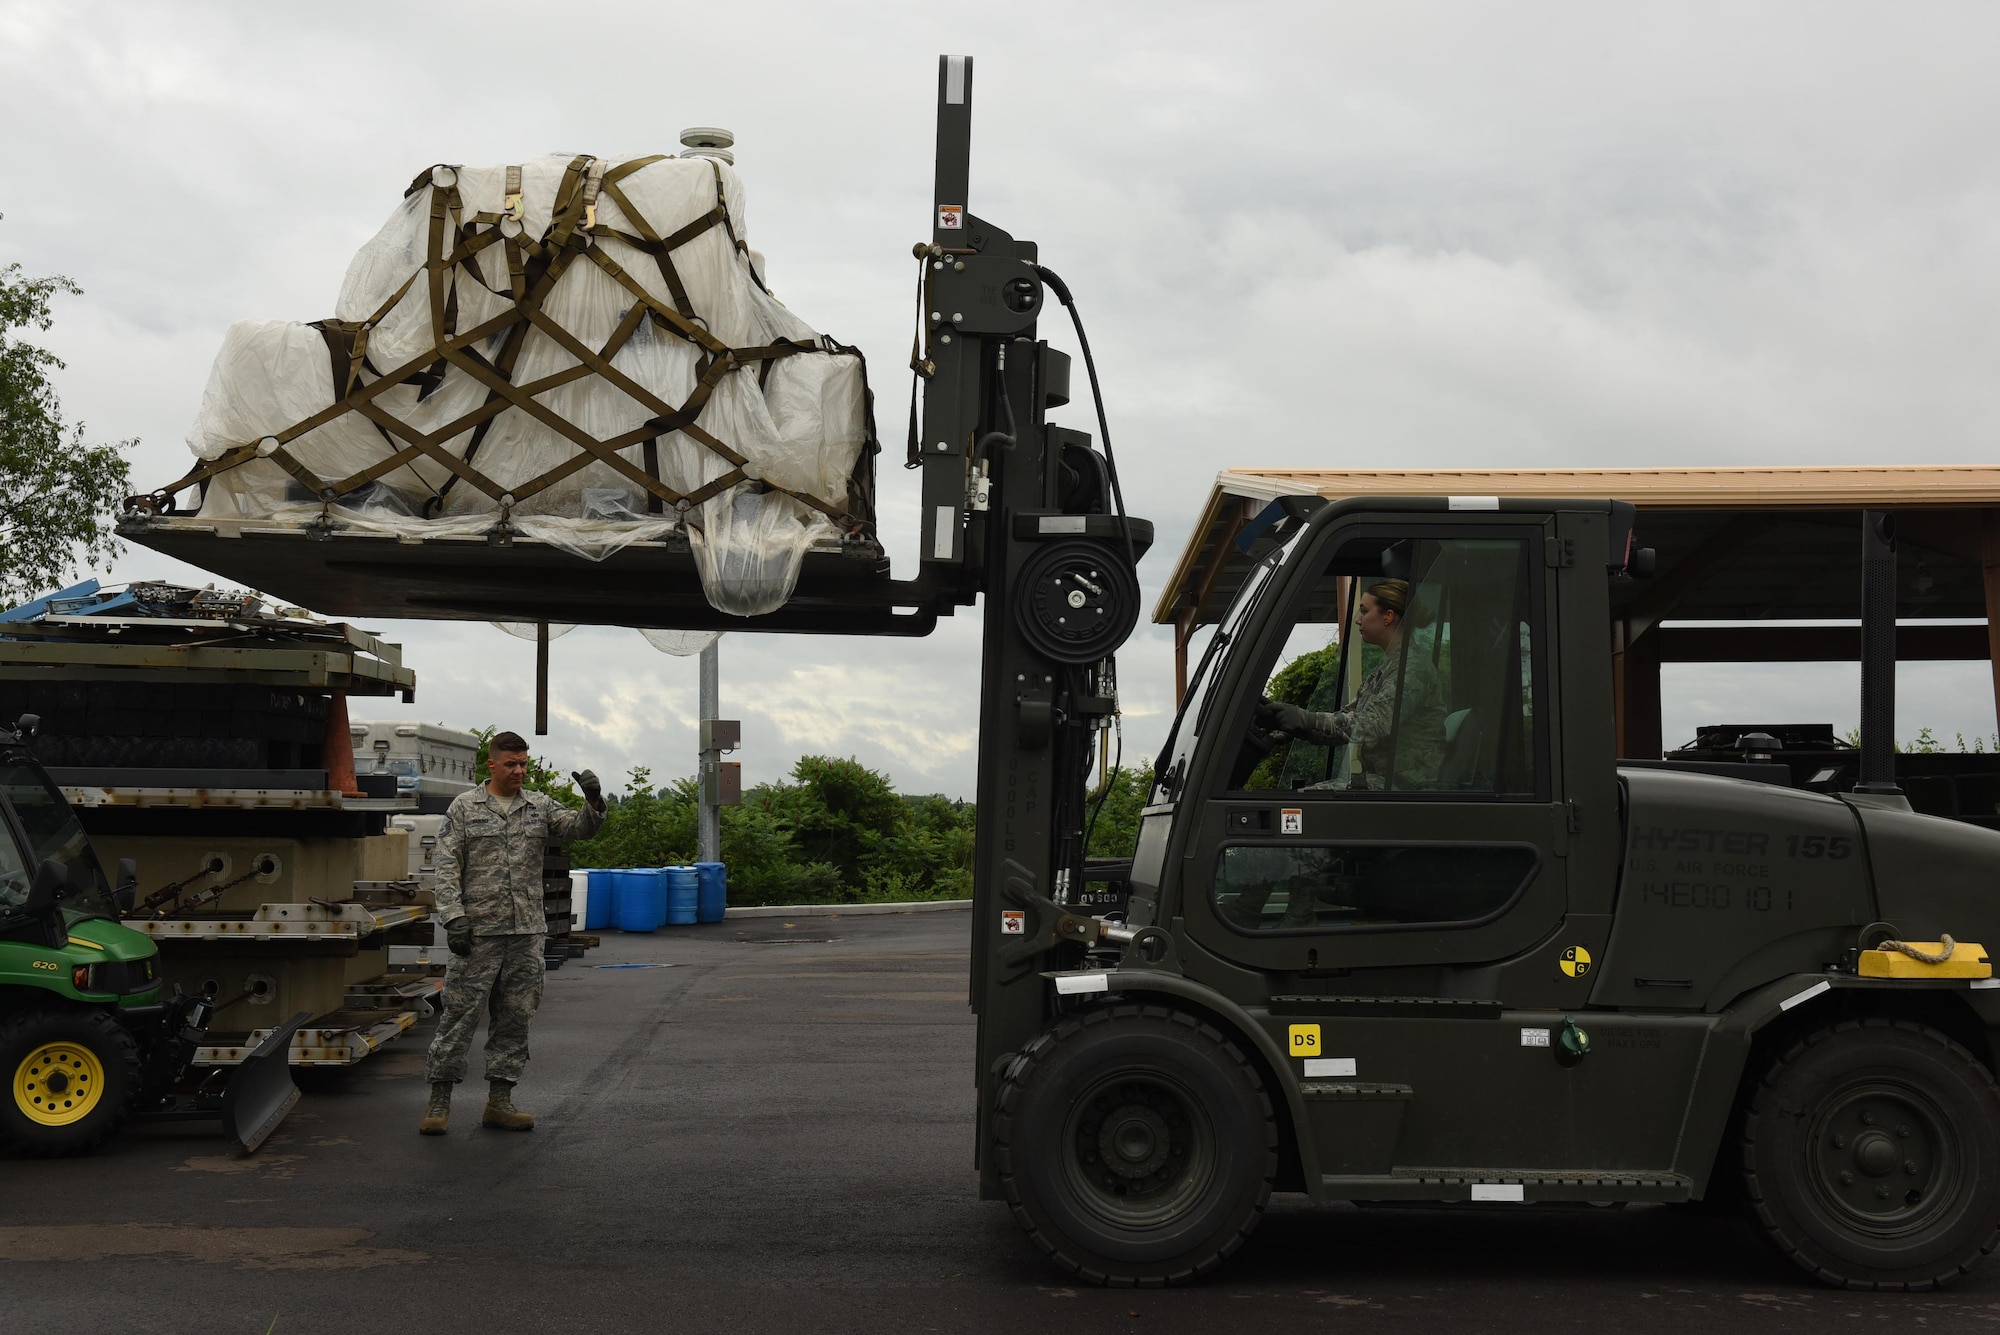 Master Sgt. Brian Babusci, traffic management office superintendent with the 911th Logistic Readiness Squadron, instructs Airman Sierra Messina, TMO apprentice with the 911th LRS, as she backs up a forklift at the Pittsburgh International Airport Air Reserve Station, June 23, 2016. The spotter's role is to direct the forklift's operator, making it possible for the operator to  move an object in their blind spot. (U.S. Air Force courtesy photo by Ashley Podrasky)